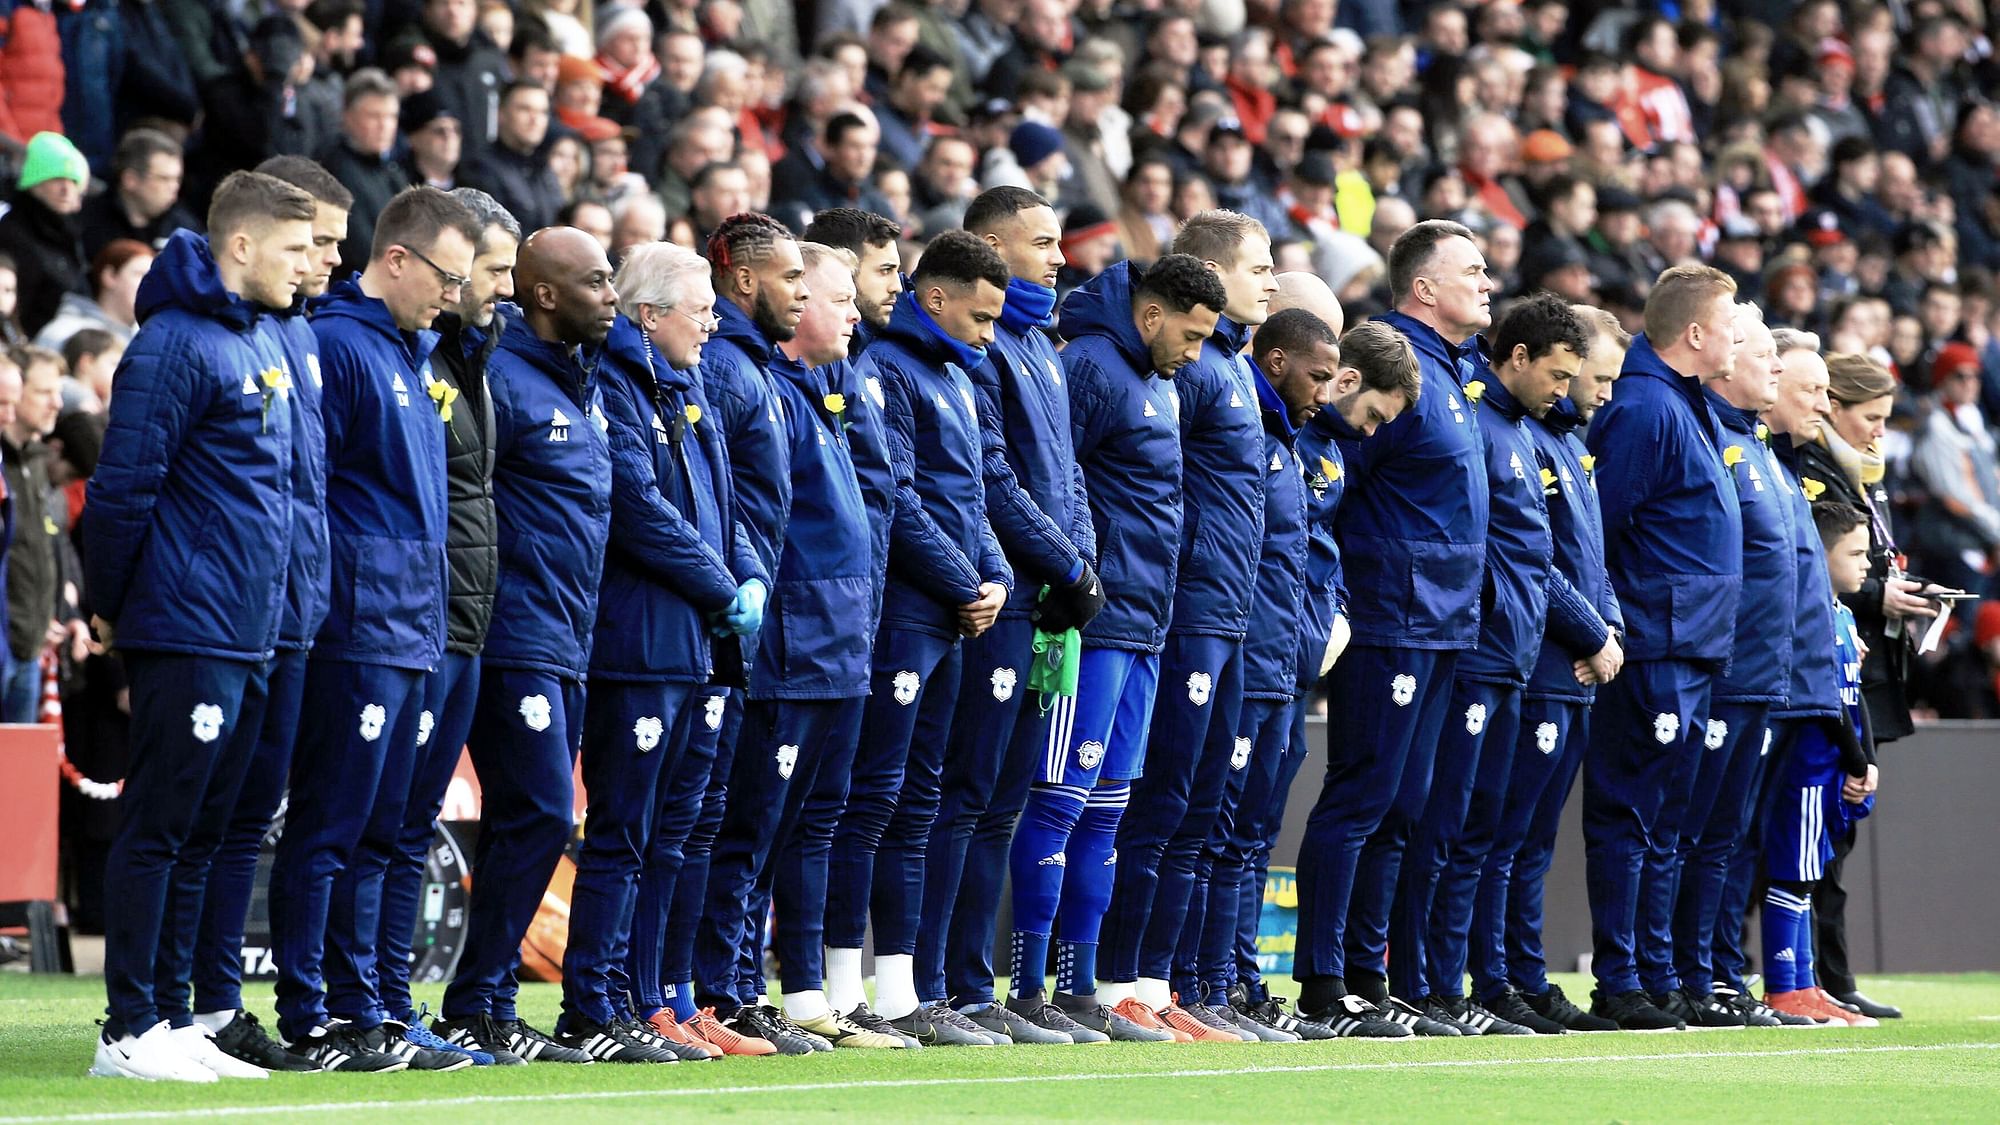 Cardiff City players observe a minute’s silence in honour of the late Emiliano Sala during the Premier League match at St Mary’s Stadium, Southampton.&nbsp;